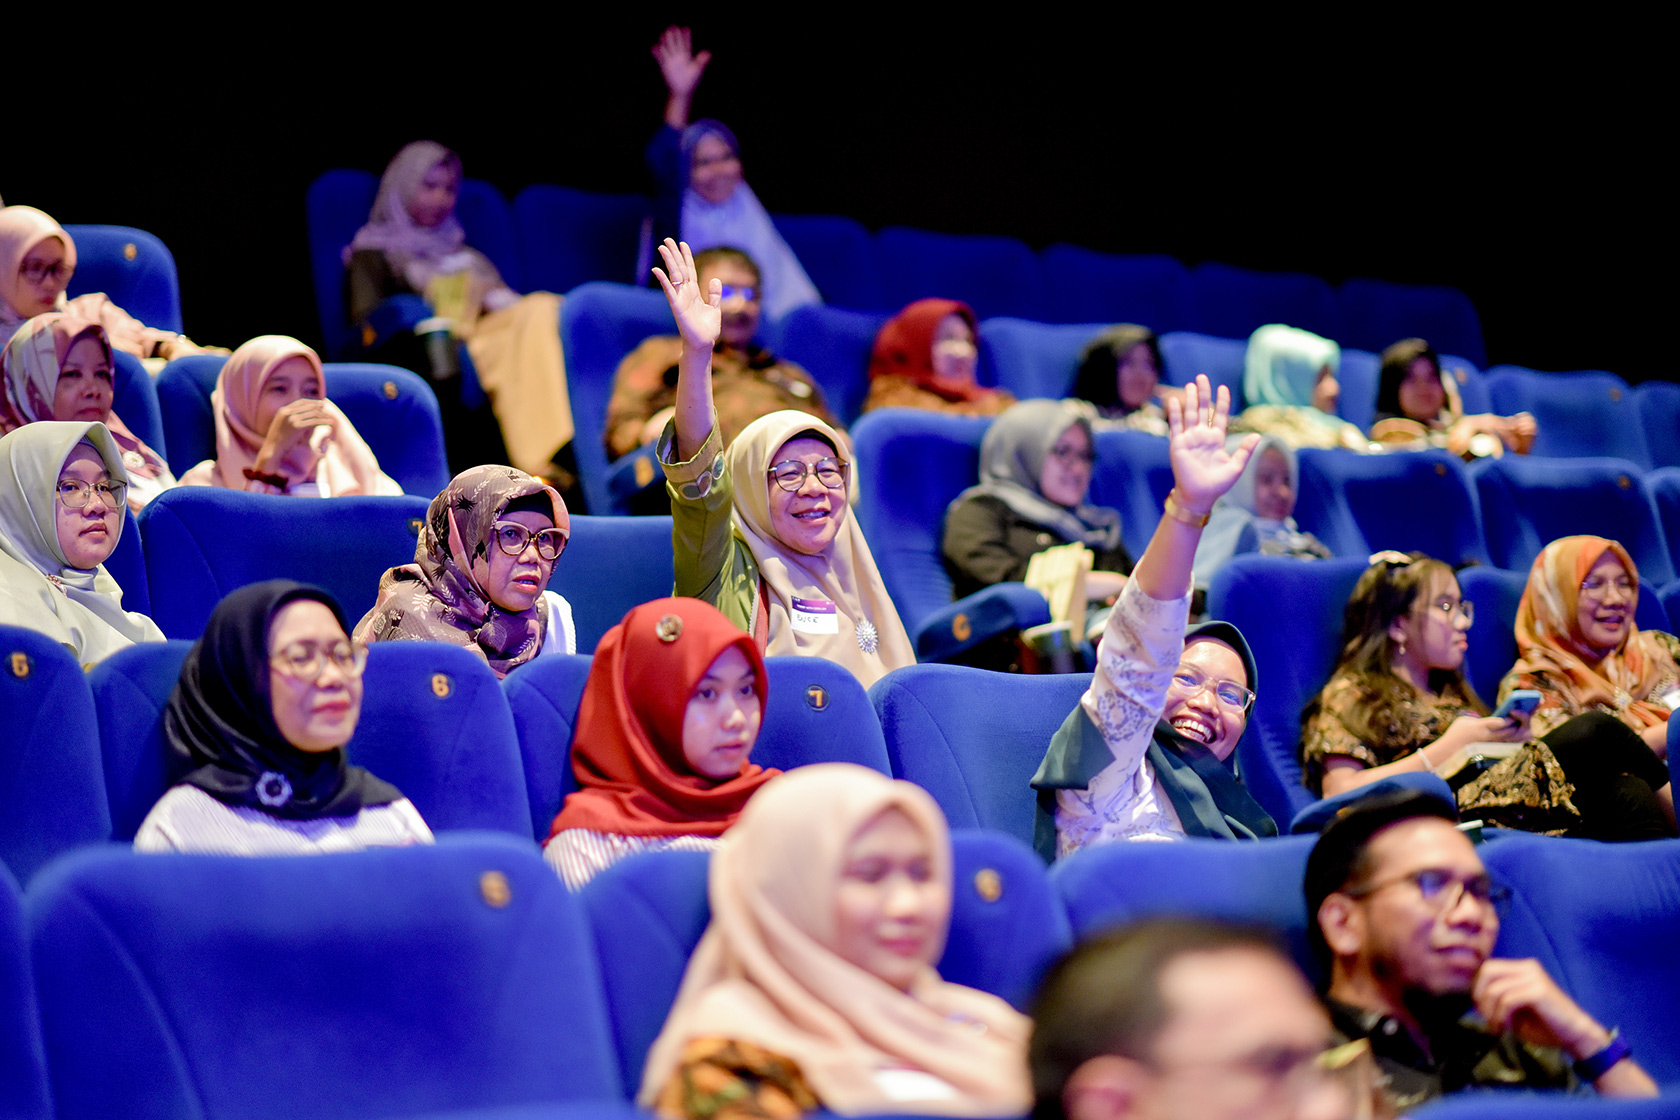 Participants of the 'Nobar' with OzAlum event in Padang raise their hands to participate in a lively and entertaining quiz.